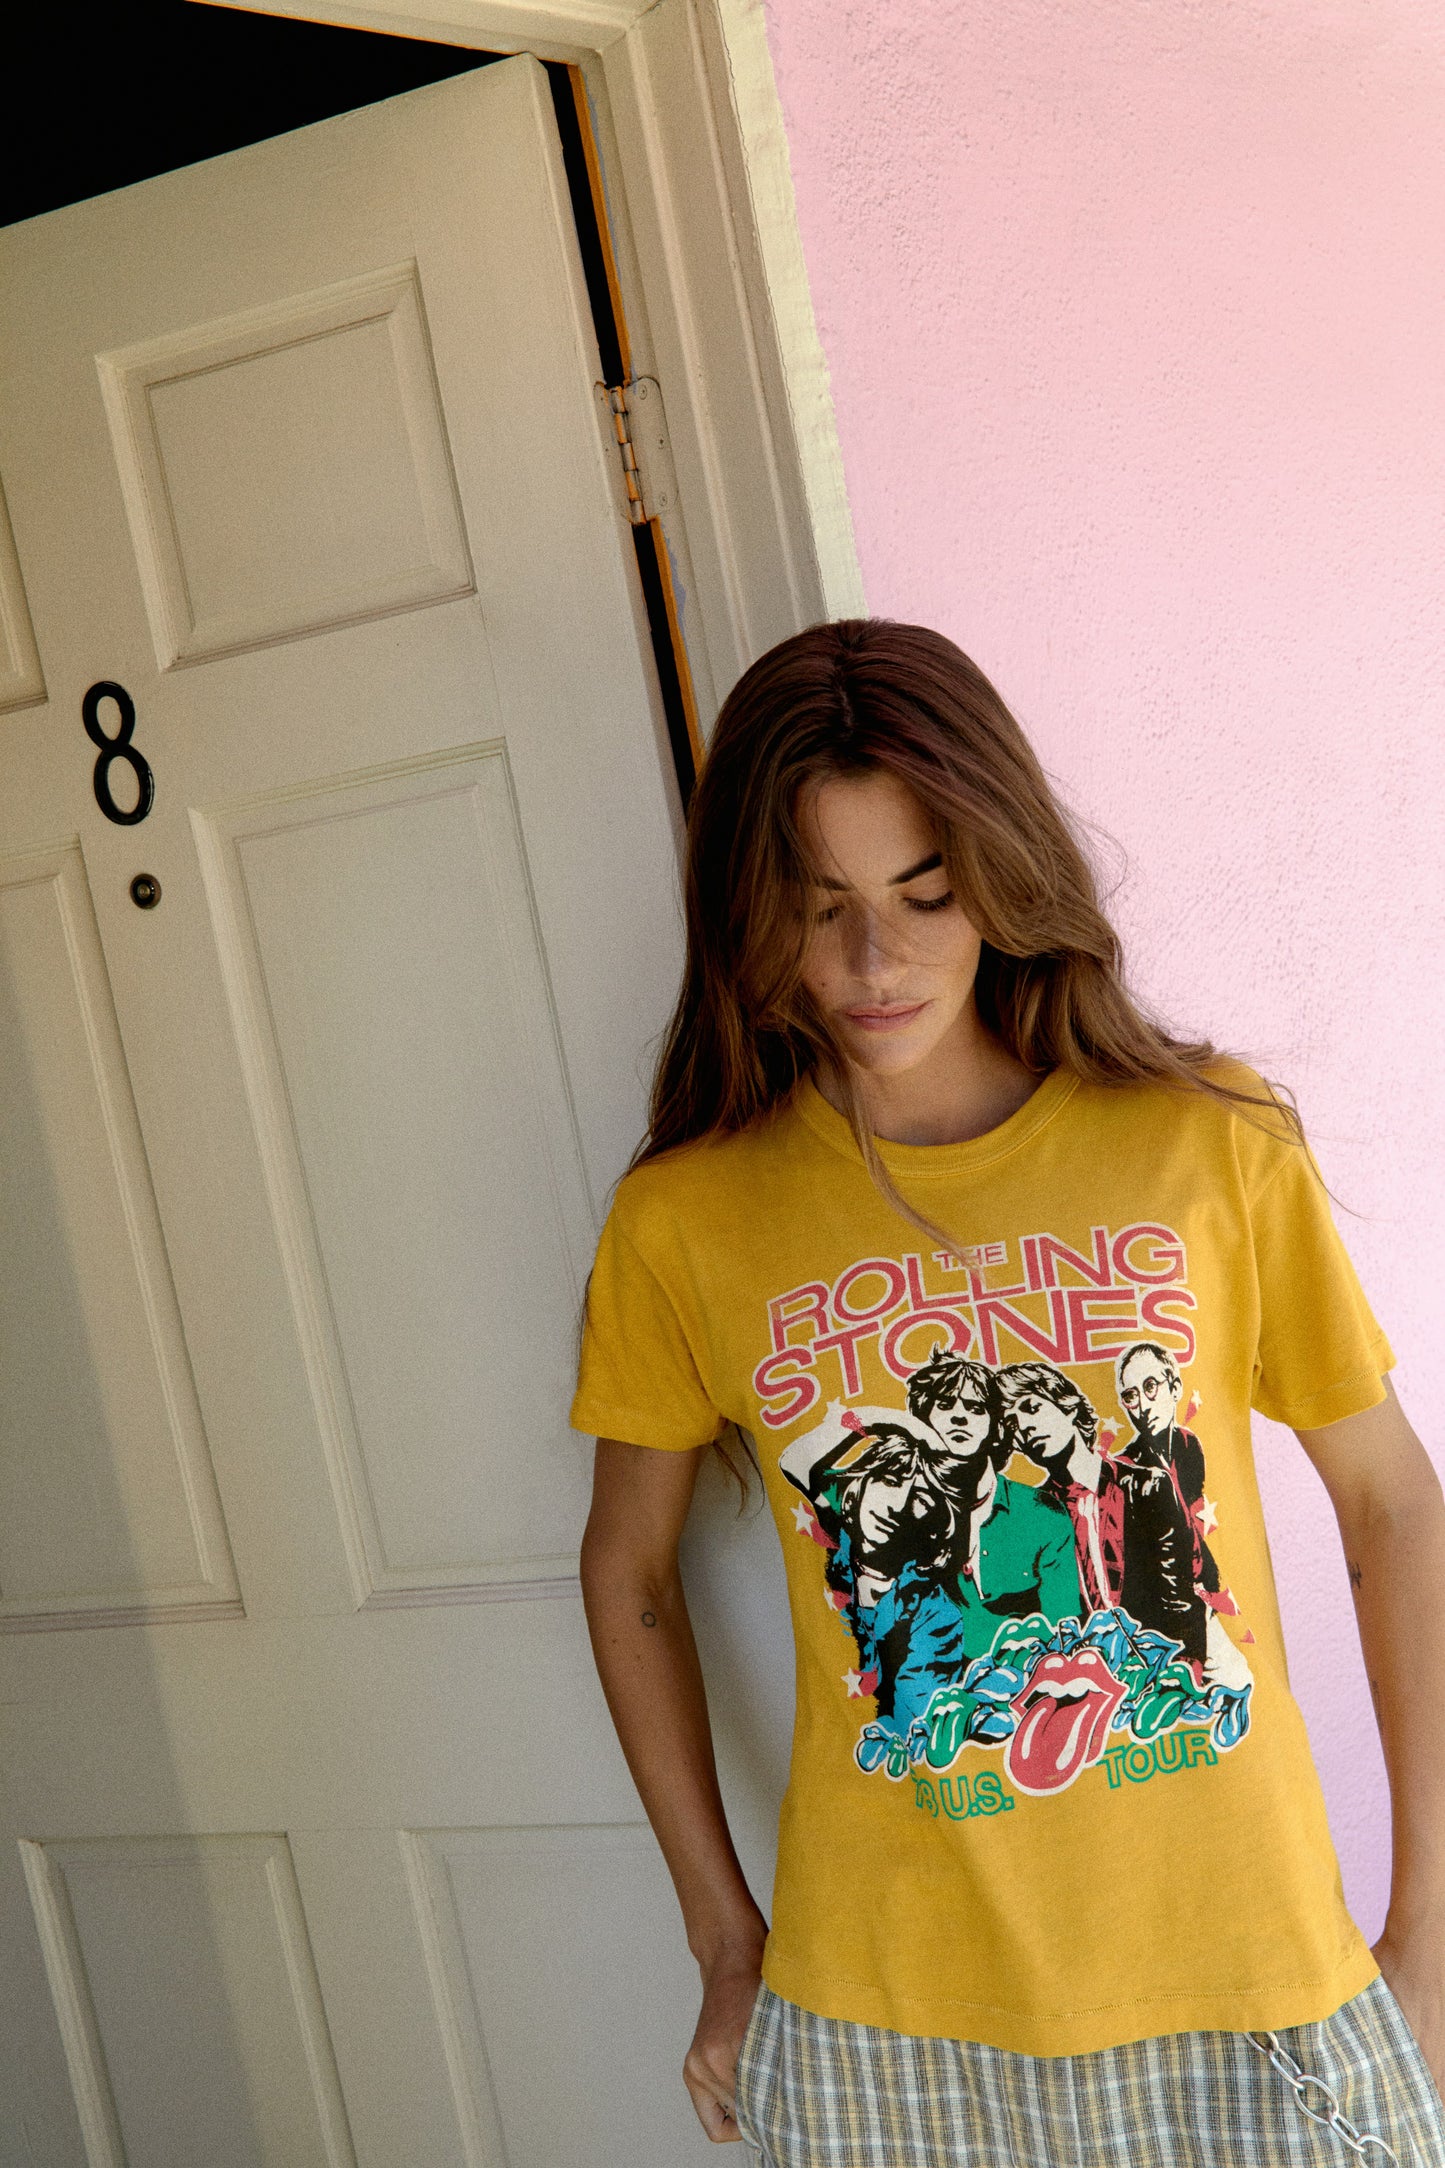 A dark-haired model featuring a golden daze tee stamped with 'The Rolling Stones' and designed with an iconic group photo of the band.